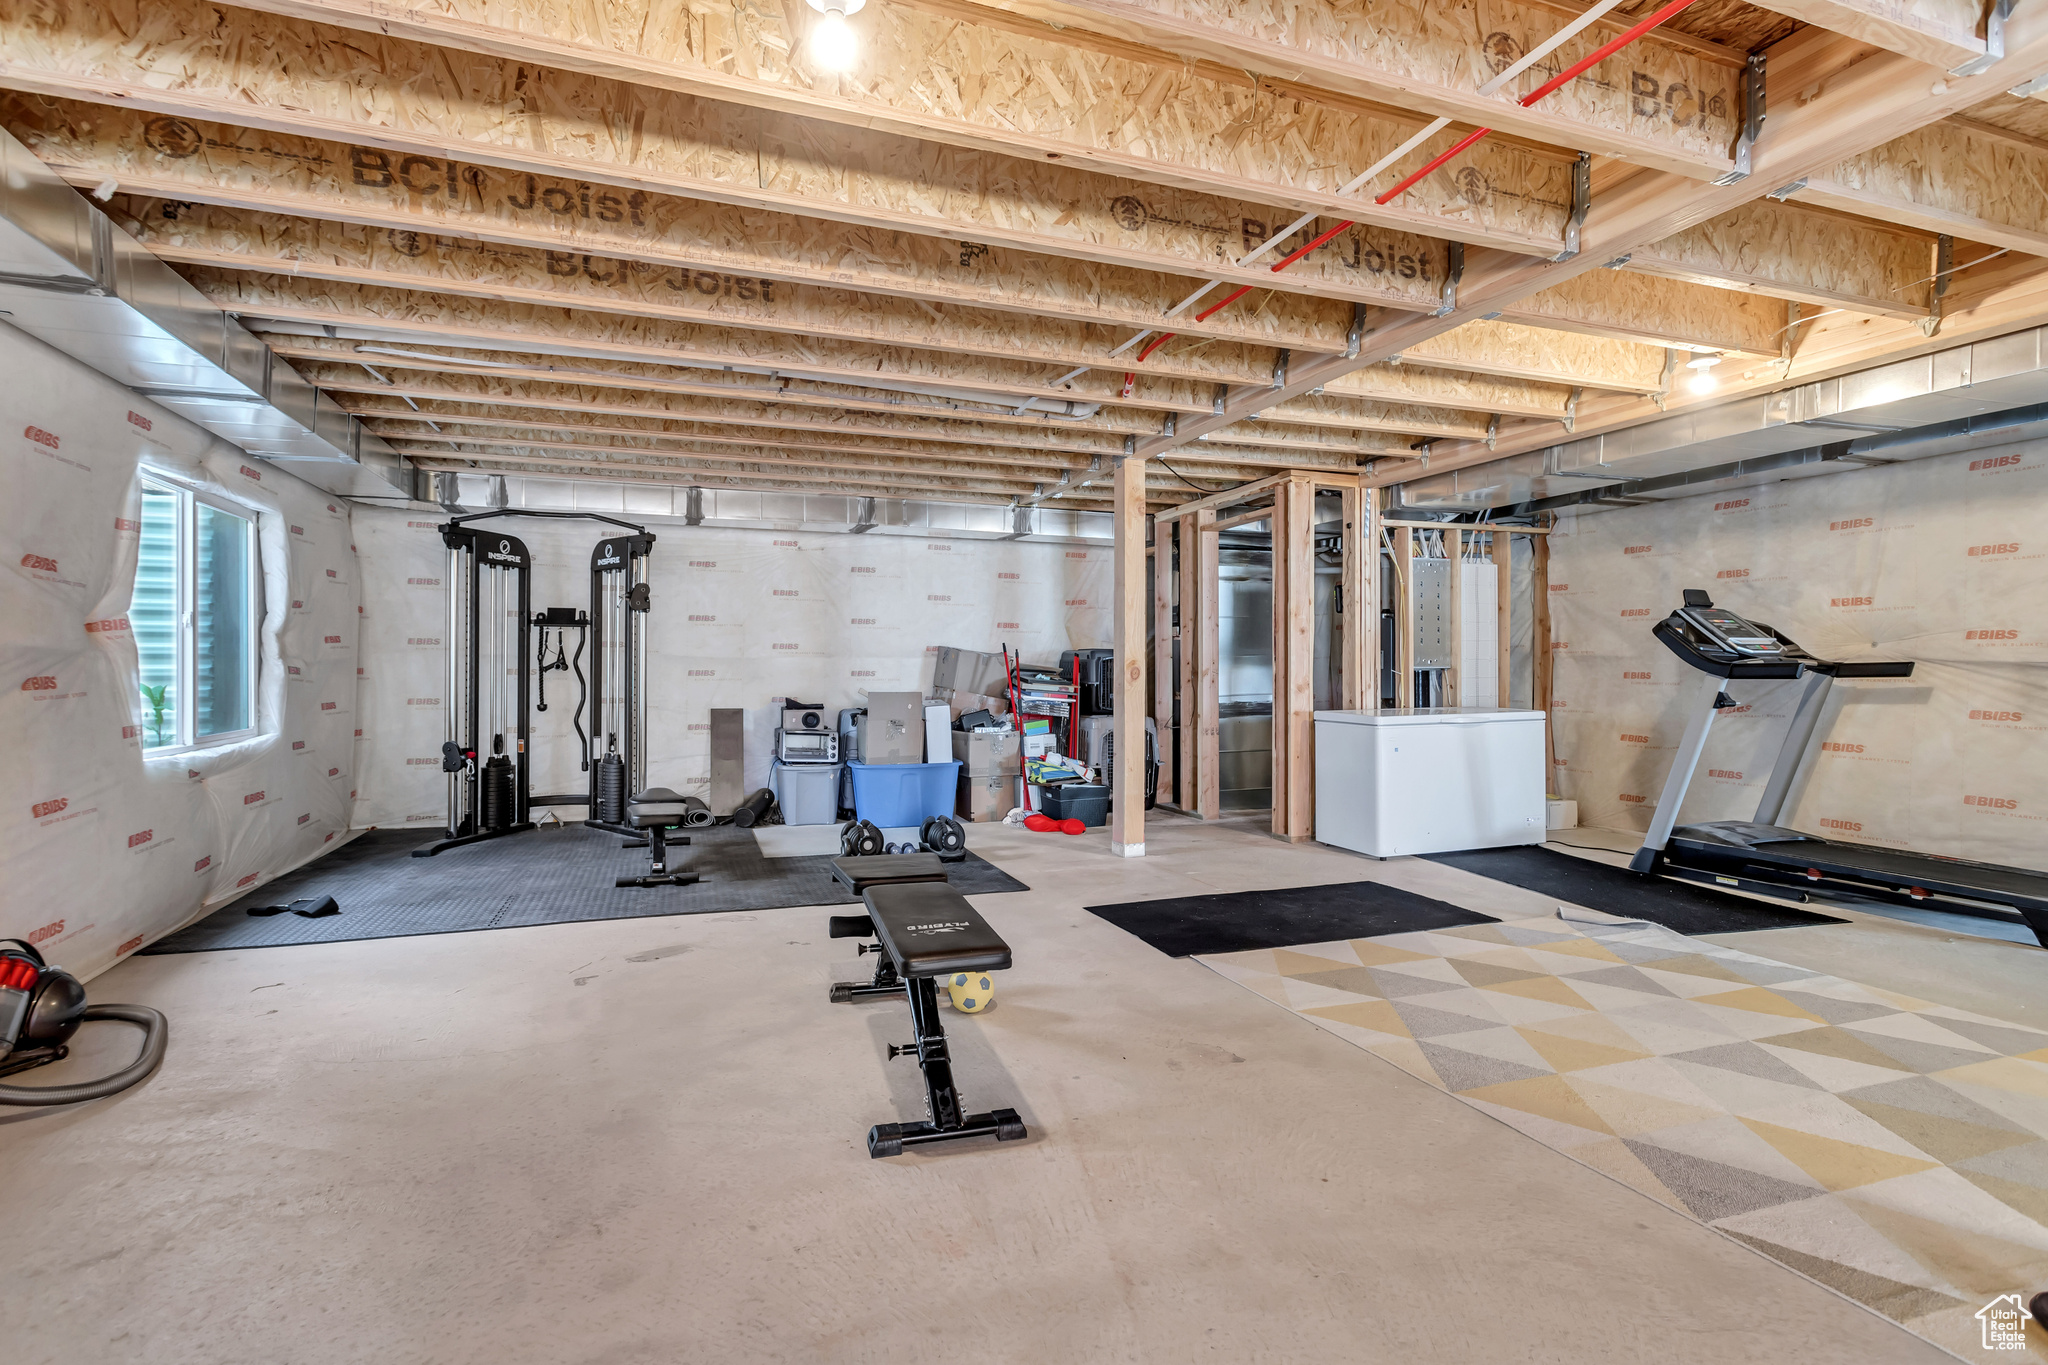 Workout area featuring concrete flooring